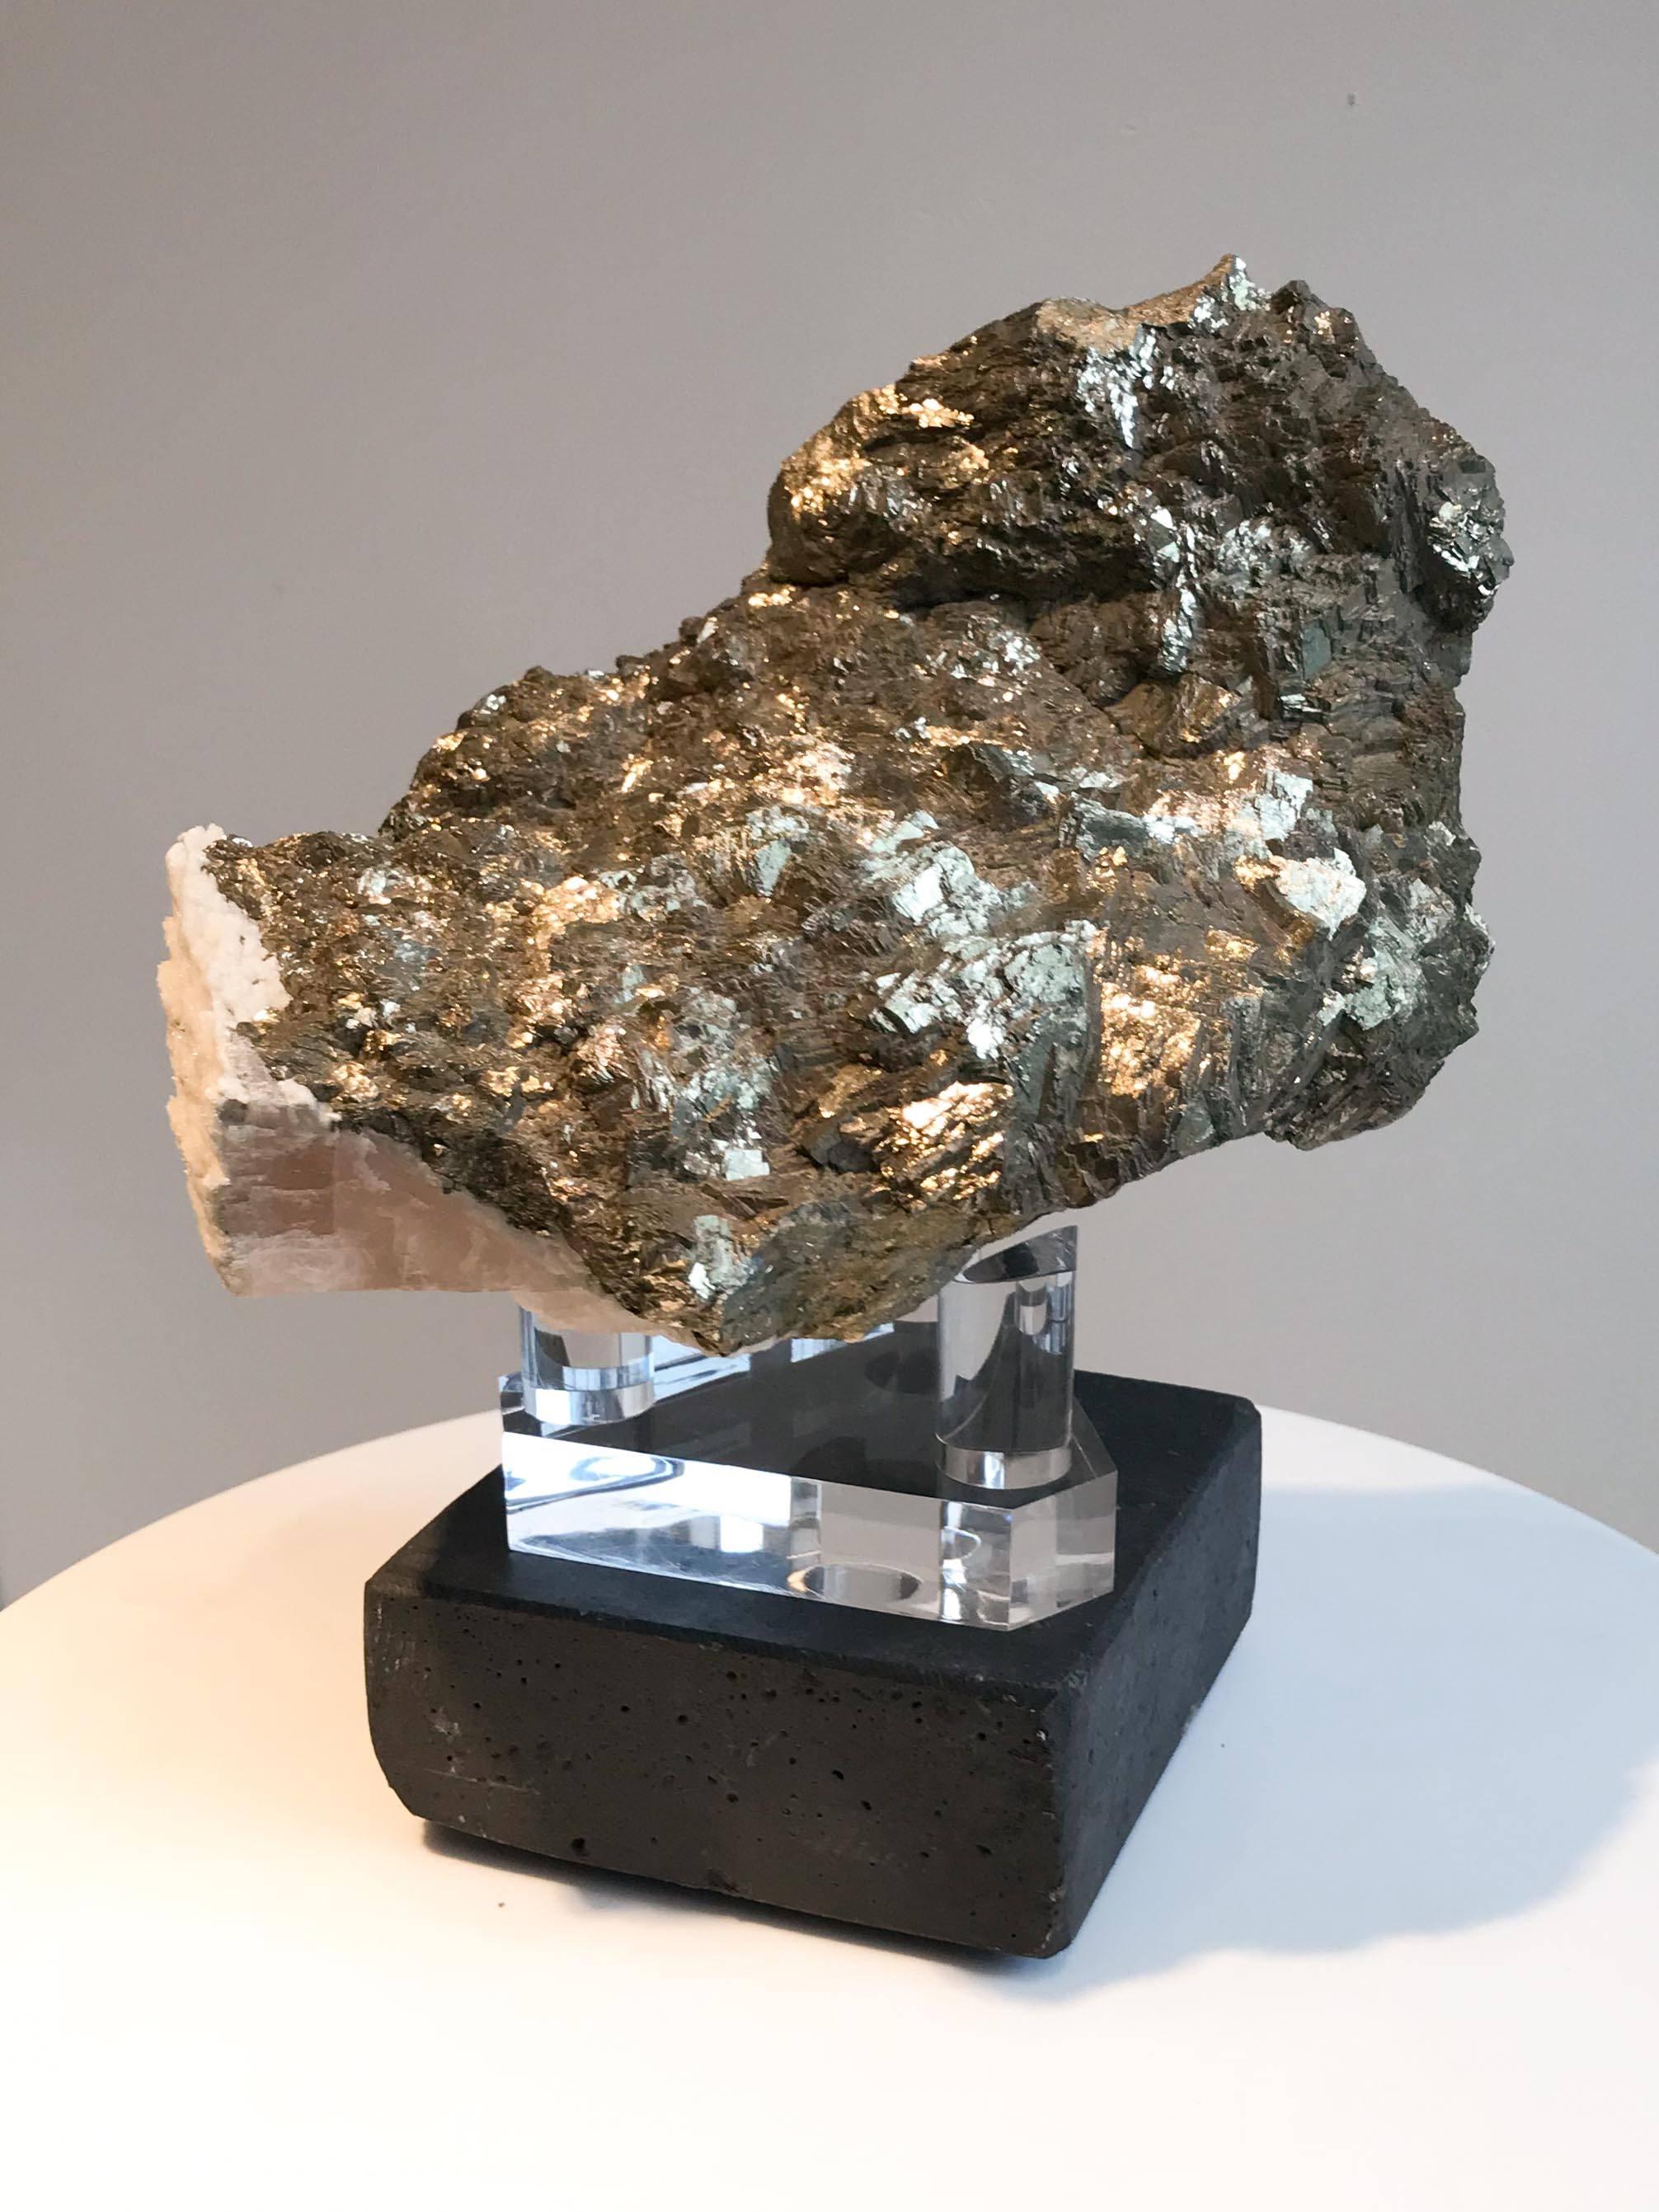 Canadian pyrite specimen on Lucite stand. Pyrite is said to be an excellent shielding stone and thought to bring abundance into one's life.